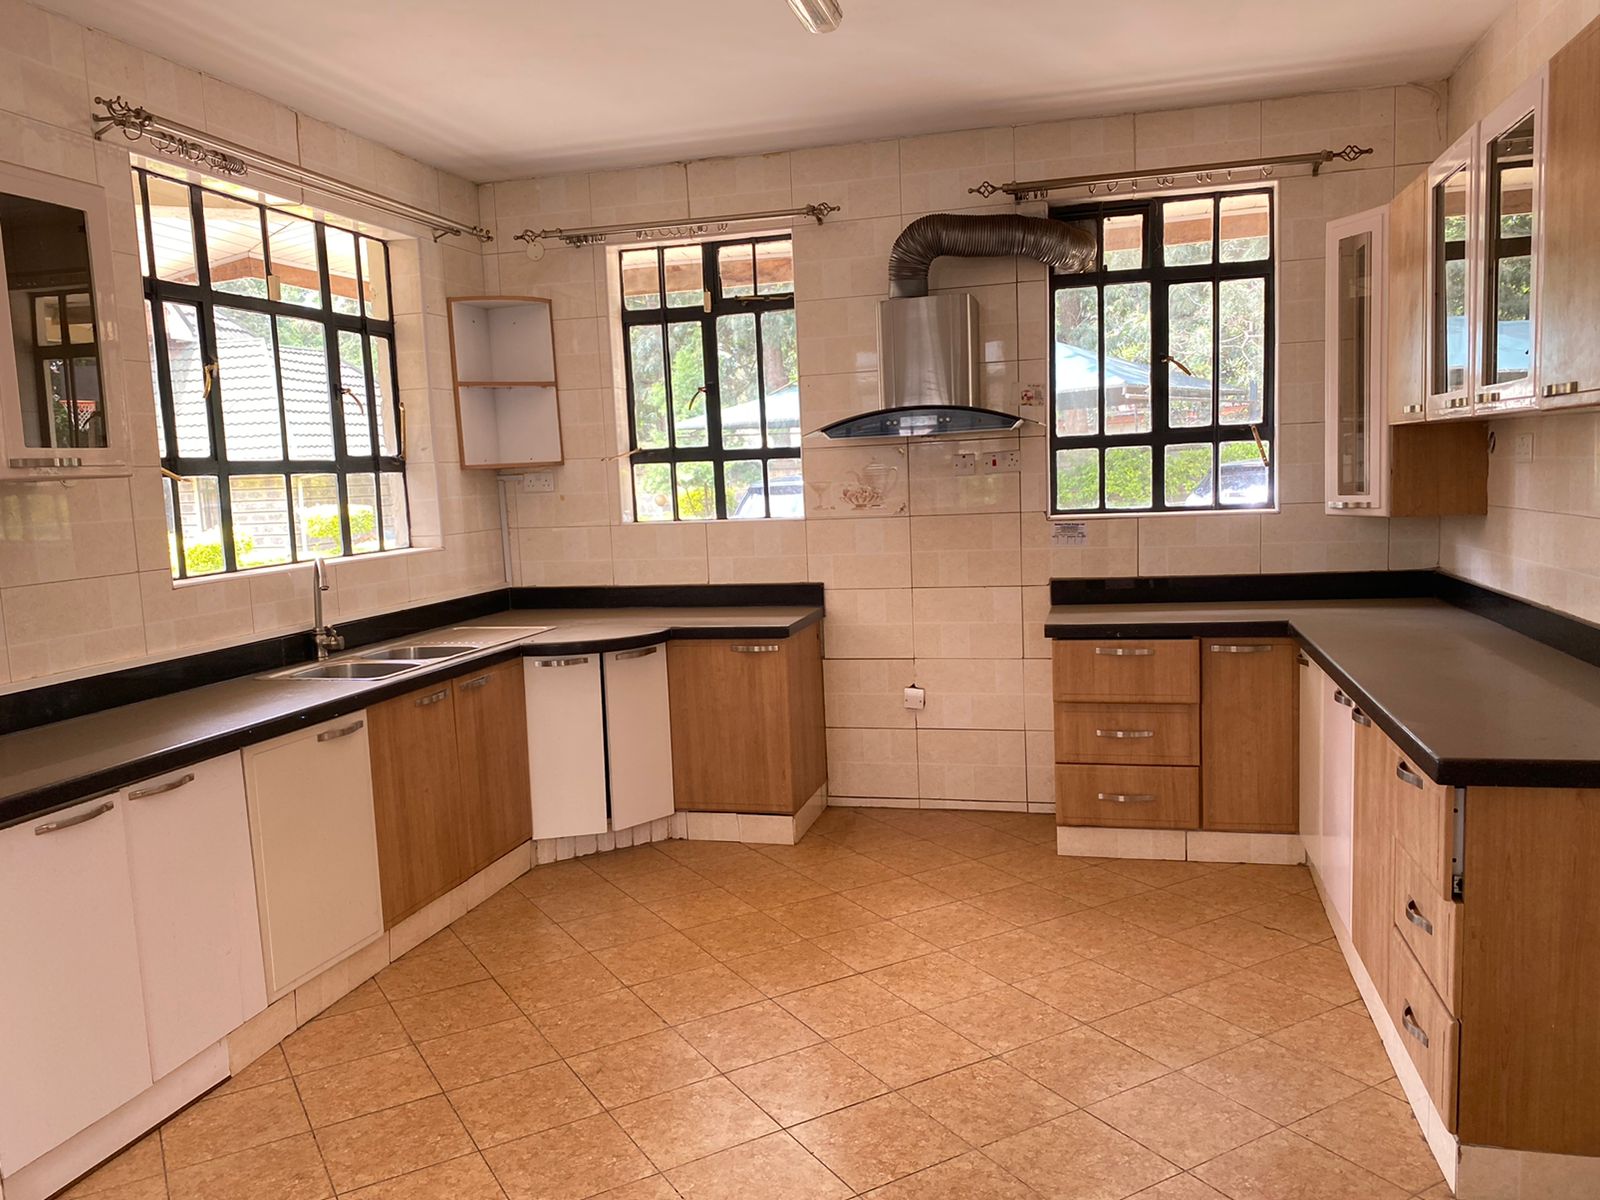 5 bedroom House in lavington all ensuite plus dsq for Sale at Ksh47m Negotiable (9)